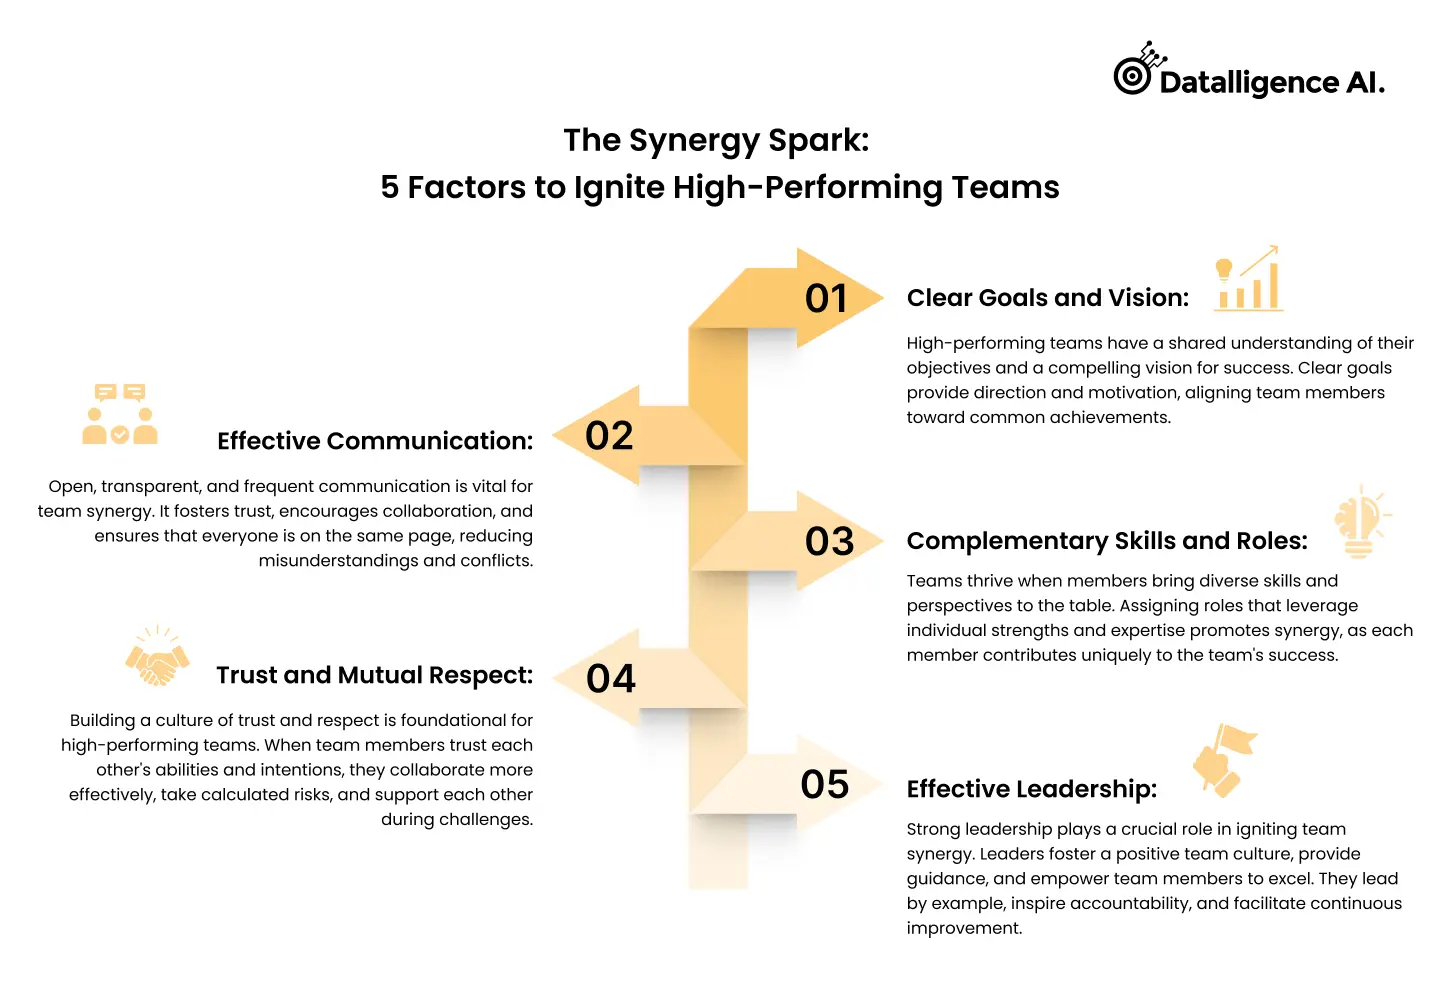 The Synergy Spark_ 5 Factors to Ignite High-Performing Teams